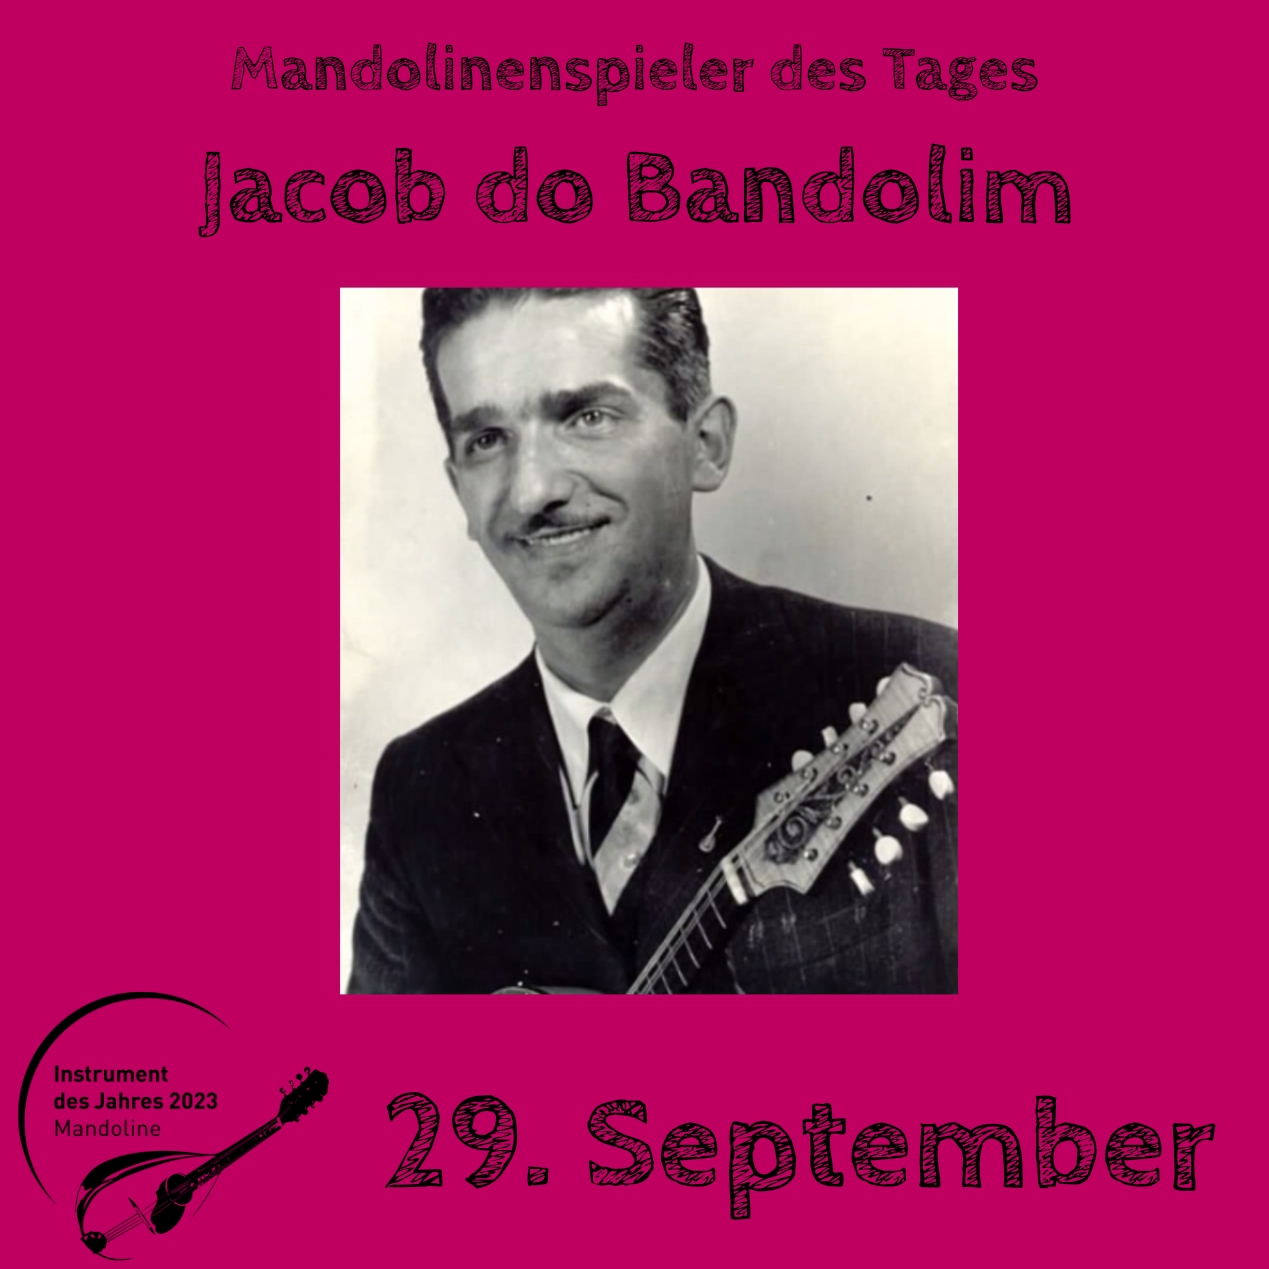 You are currently viewing 29. September – Jacob do Bandolim